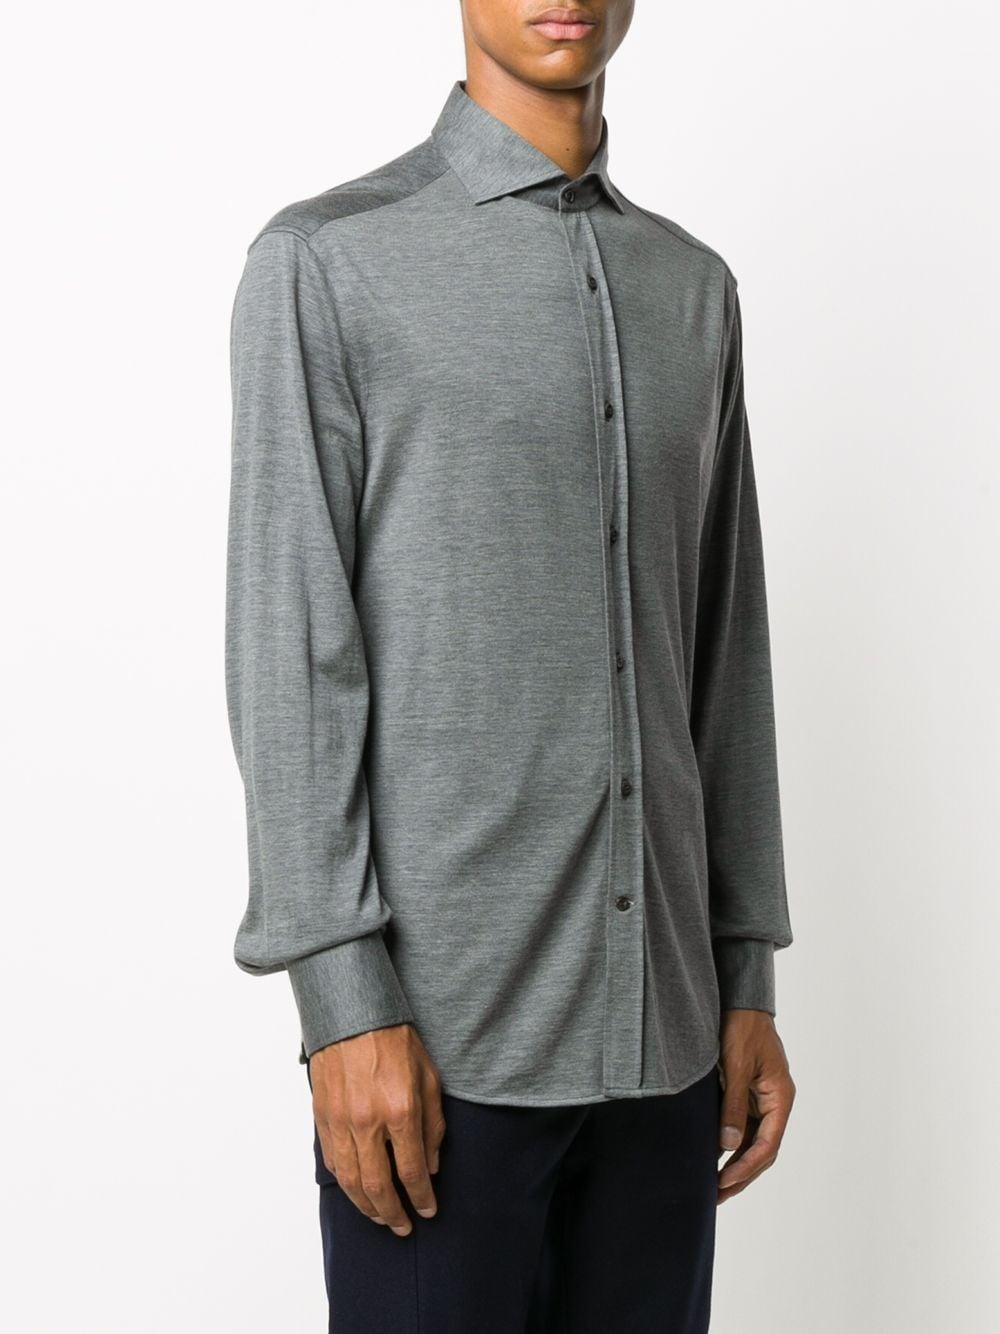 Brunello Cucinelli Silk Relaxed Fit Shirt in Grey (Gray) for Men - Lyst